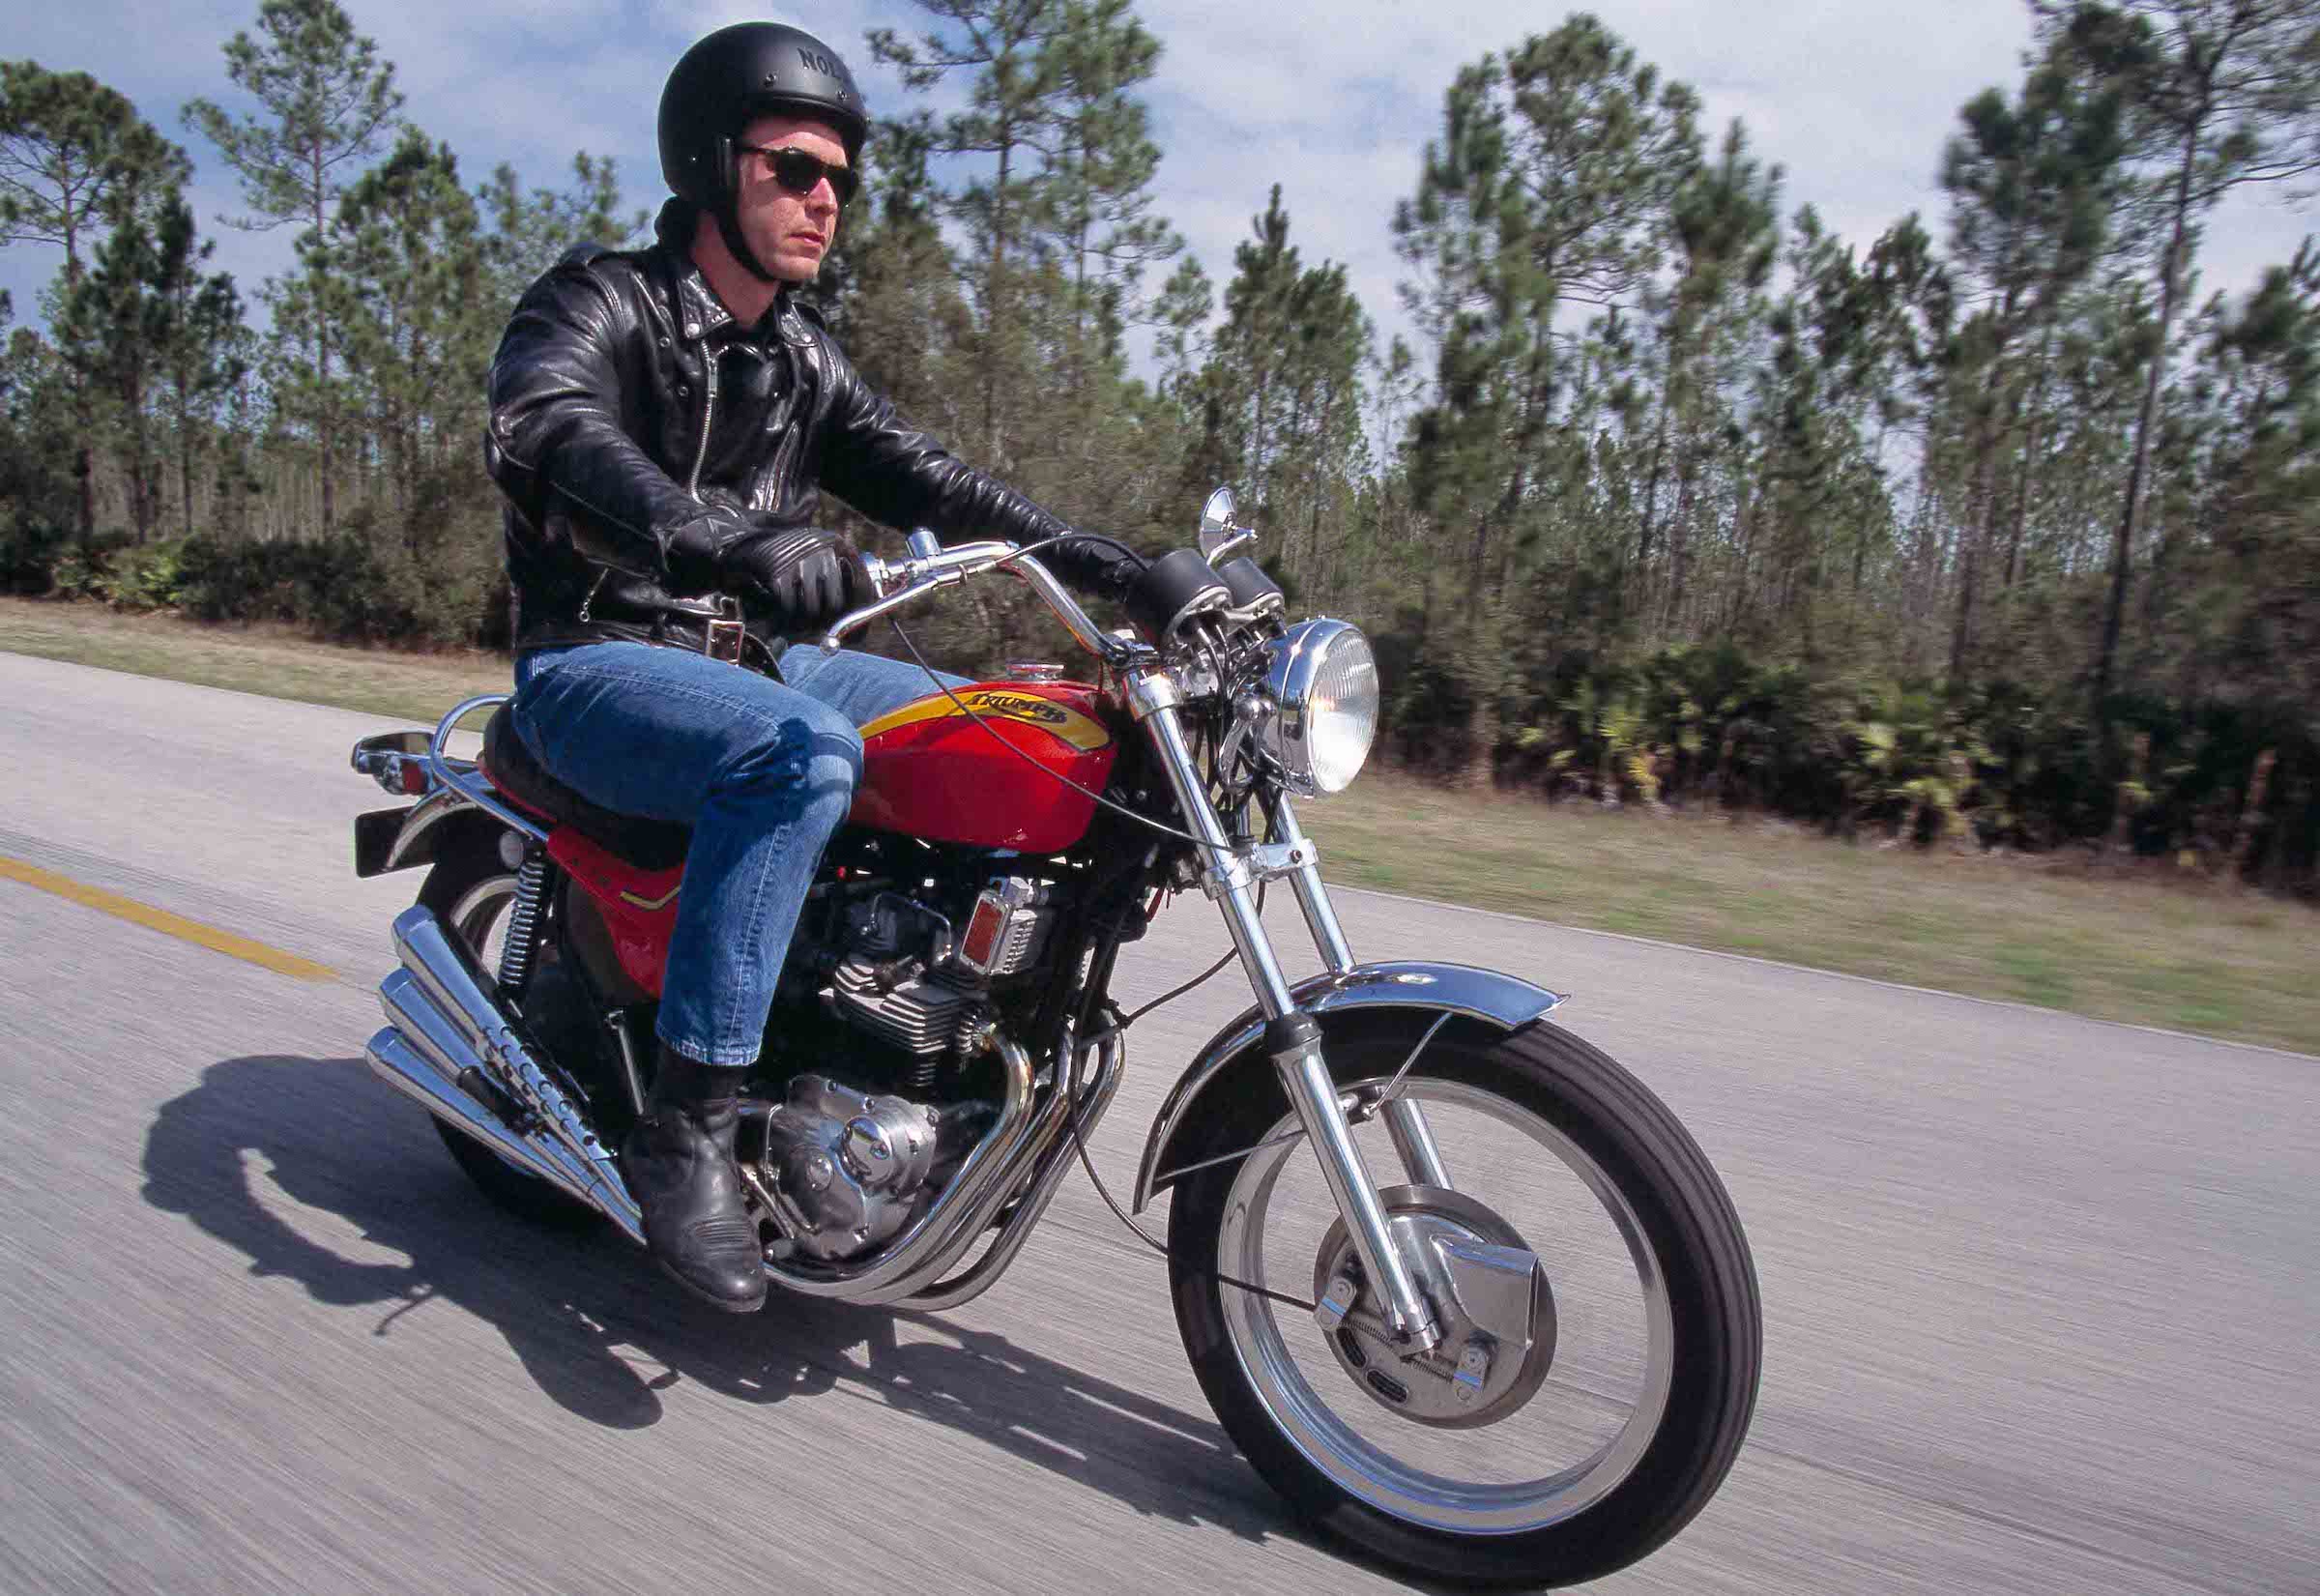 The Triumph X-75 Hurricane’s speed will blow you away